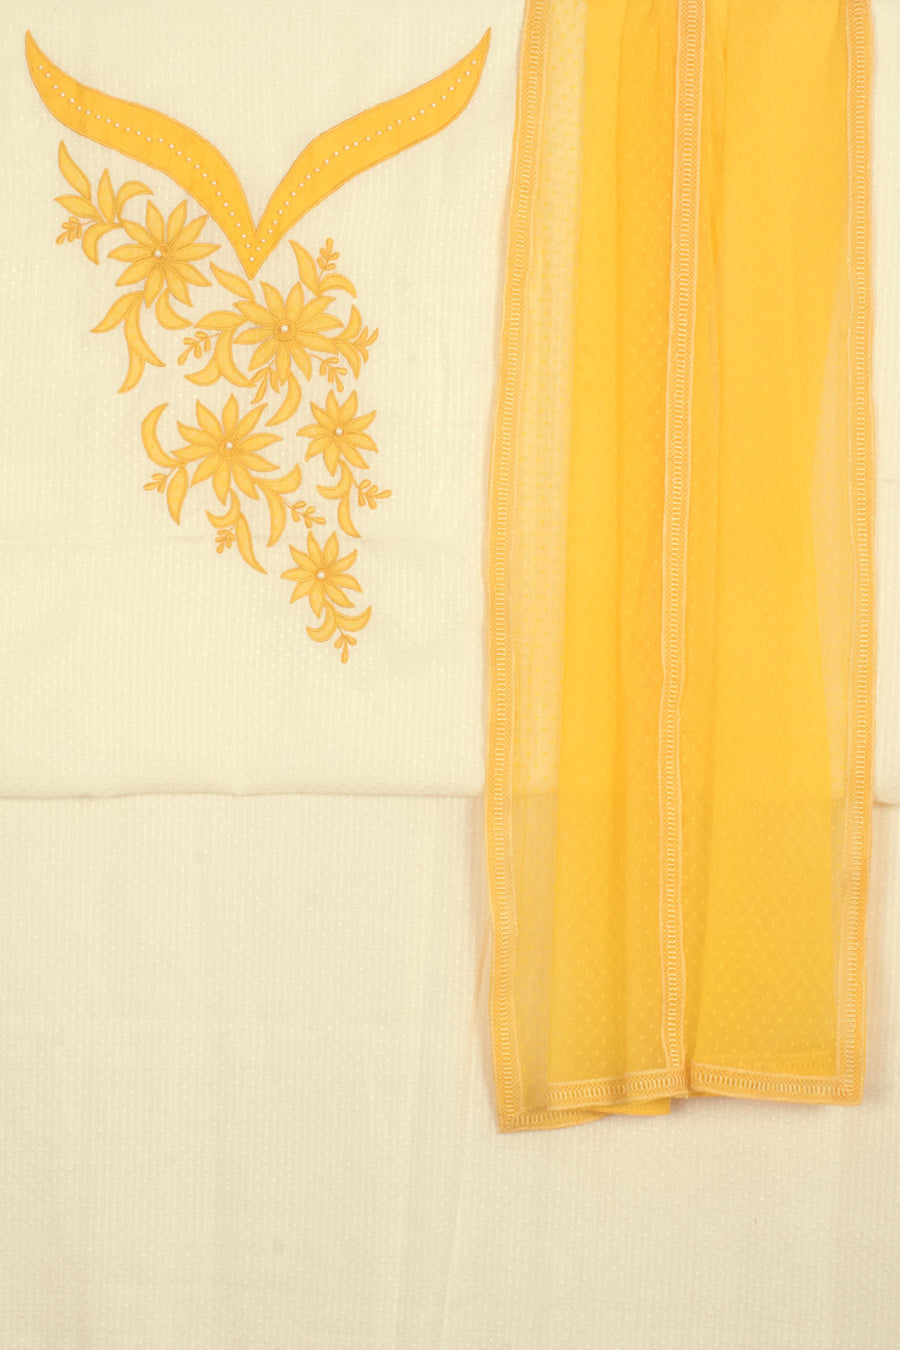 Hand Embroidered Doria Cotton 3-Piece Salwar Suit Material with Net Embroidery Yoke, Pearl Work and Self-dotted yellow net Dupatta